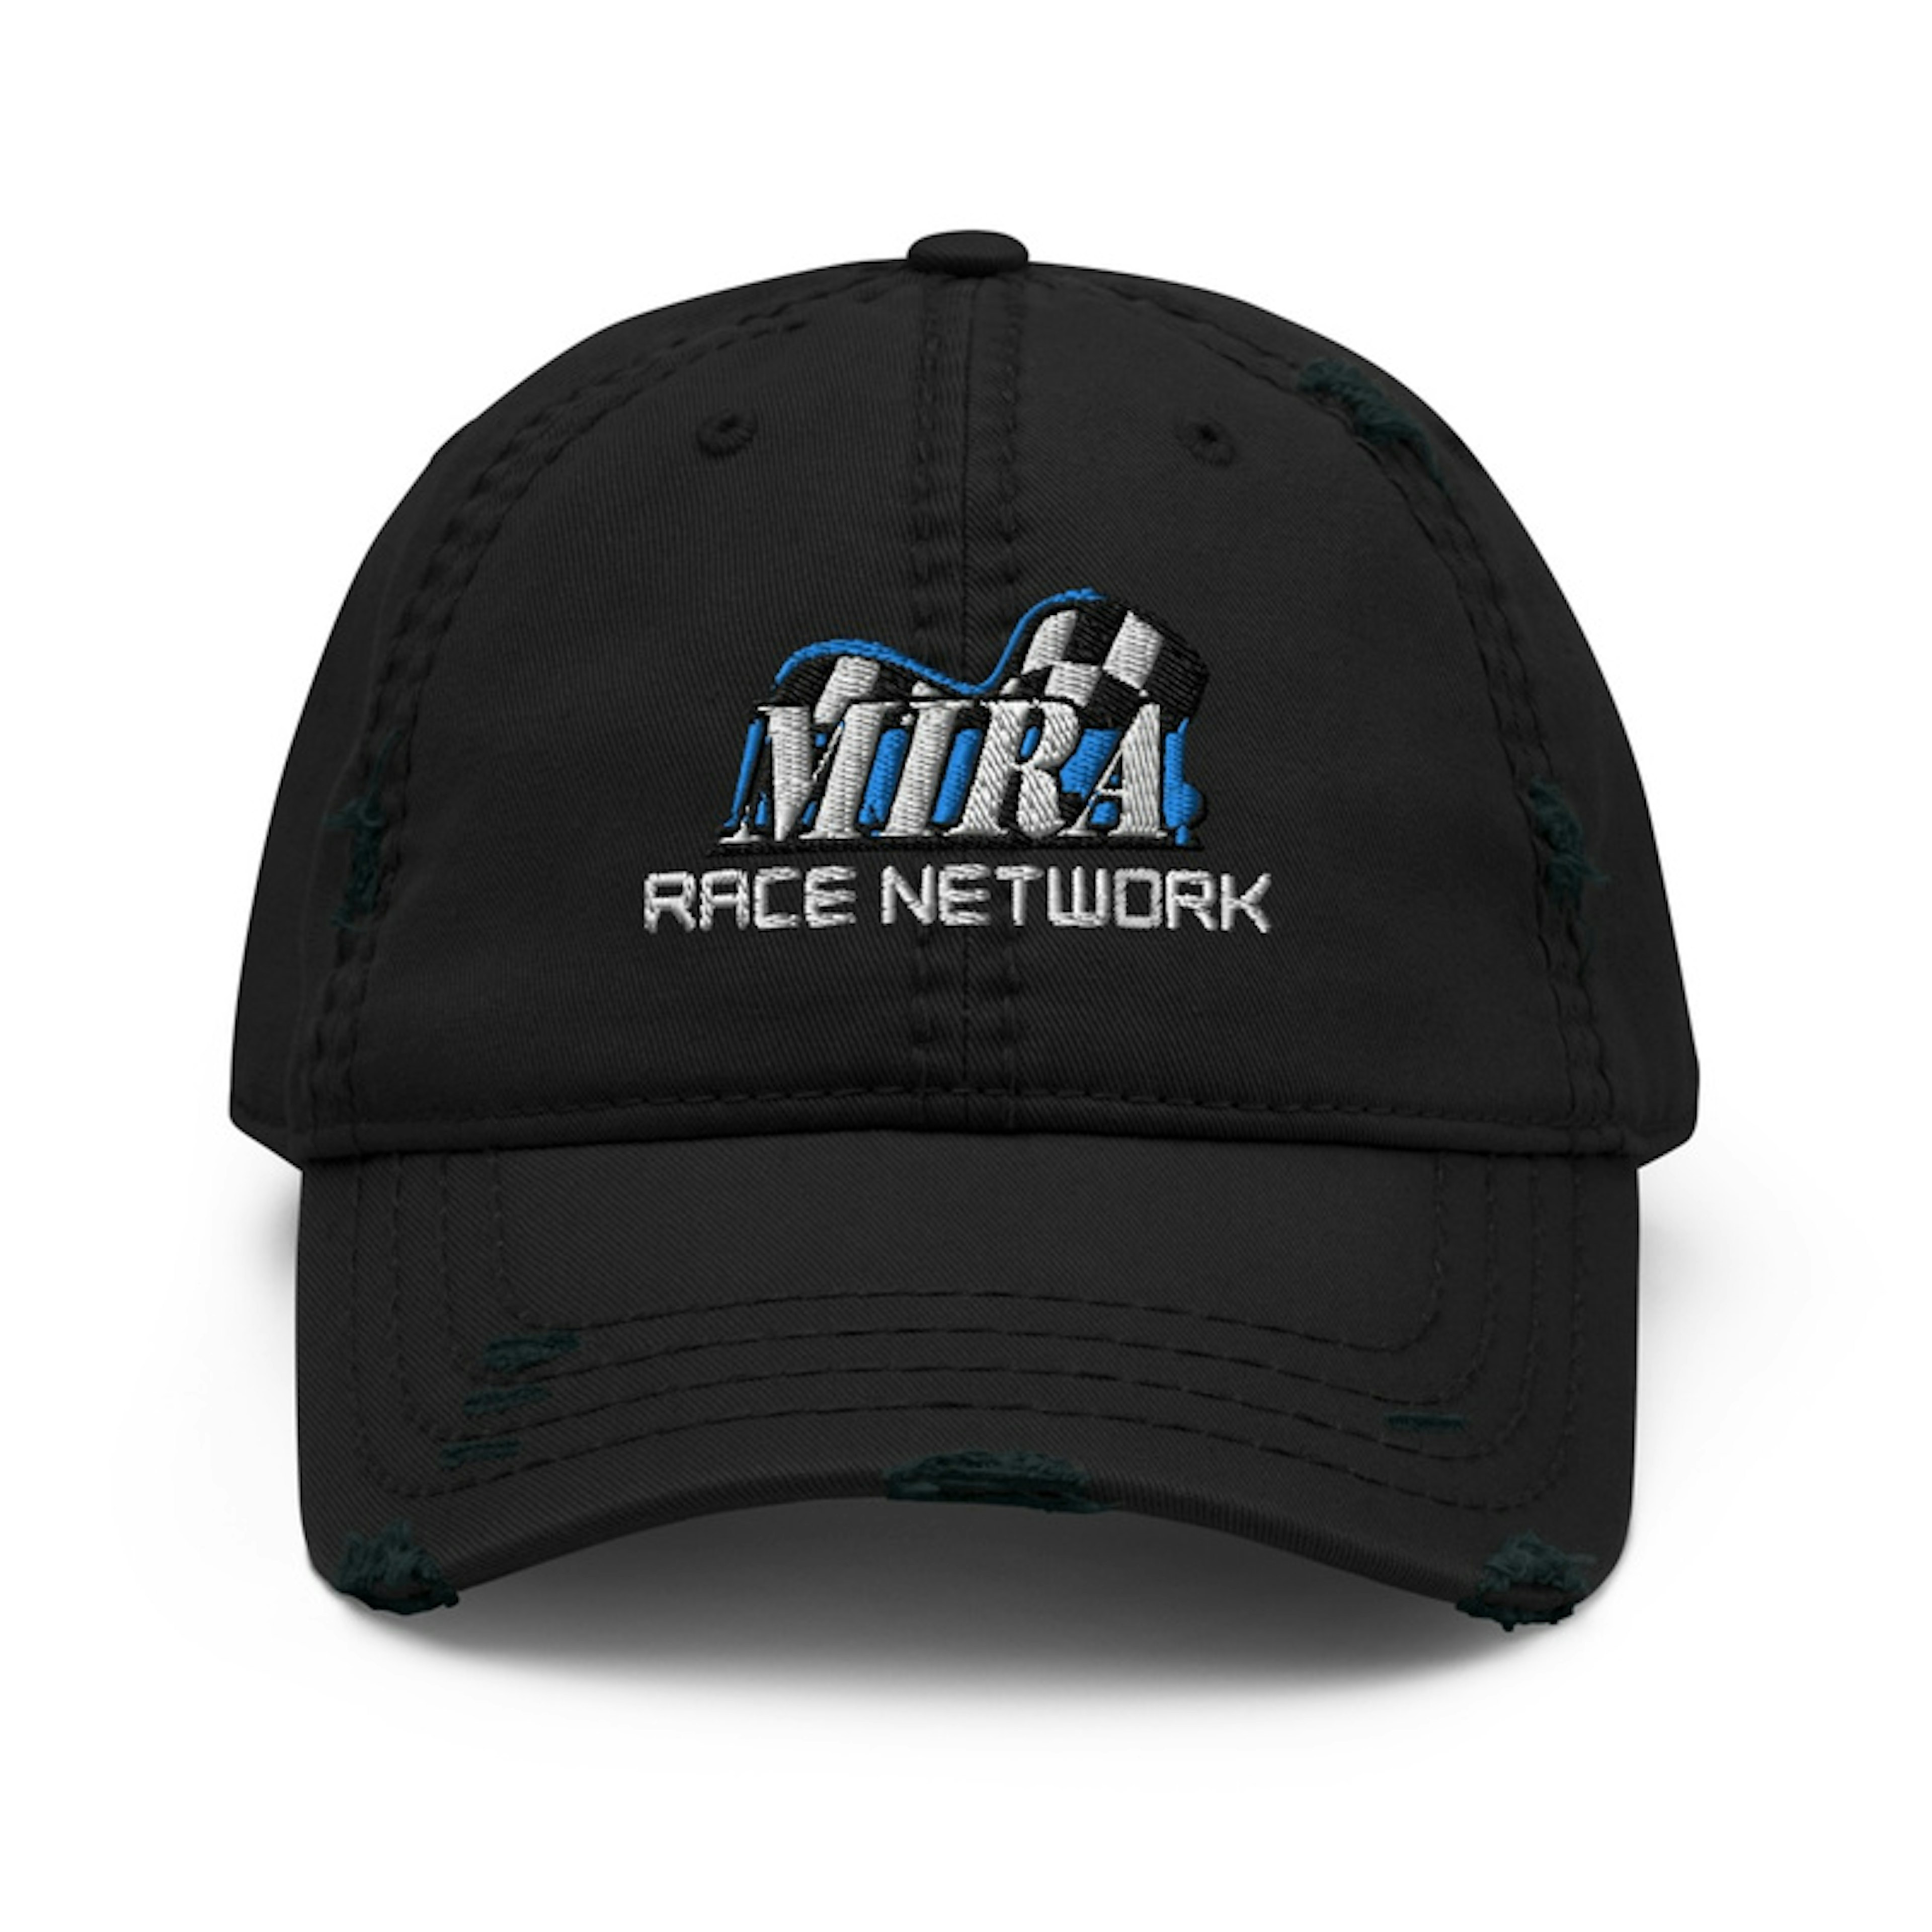 The CLASSIC MRN Hat